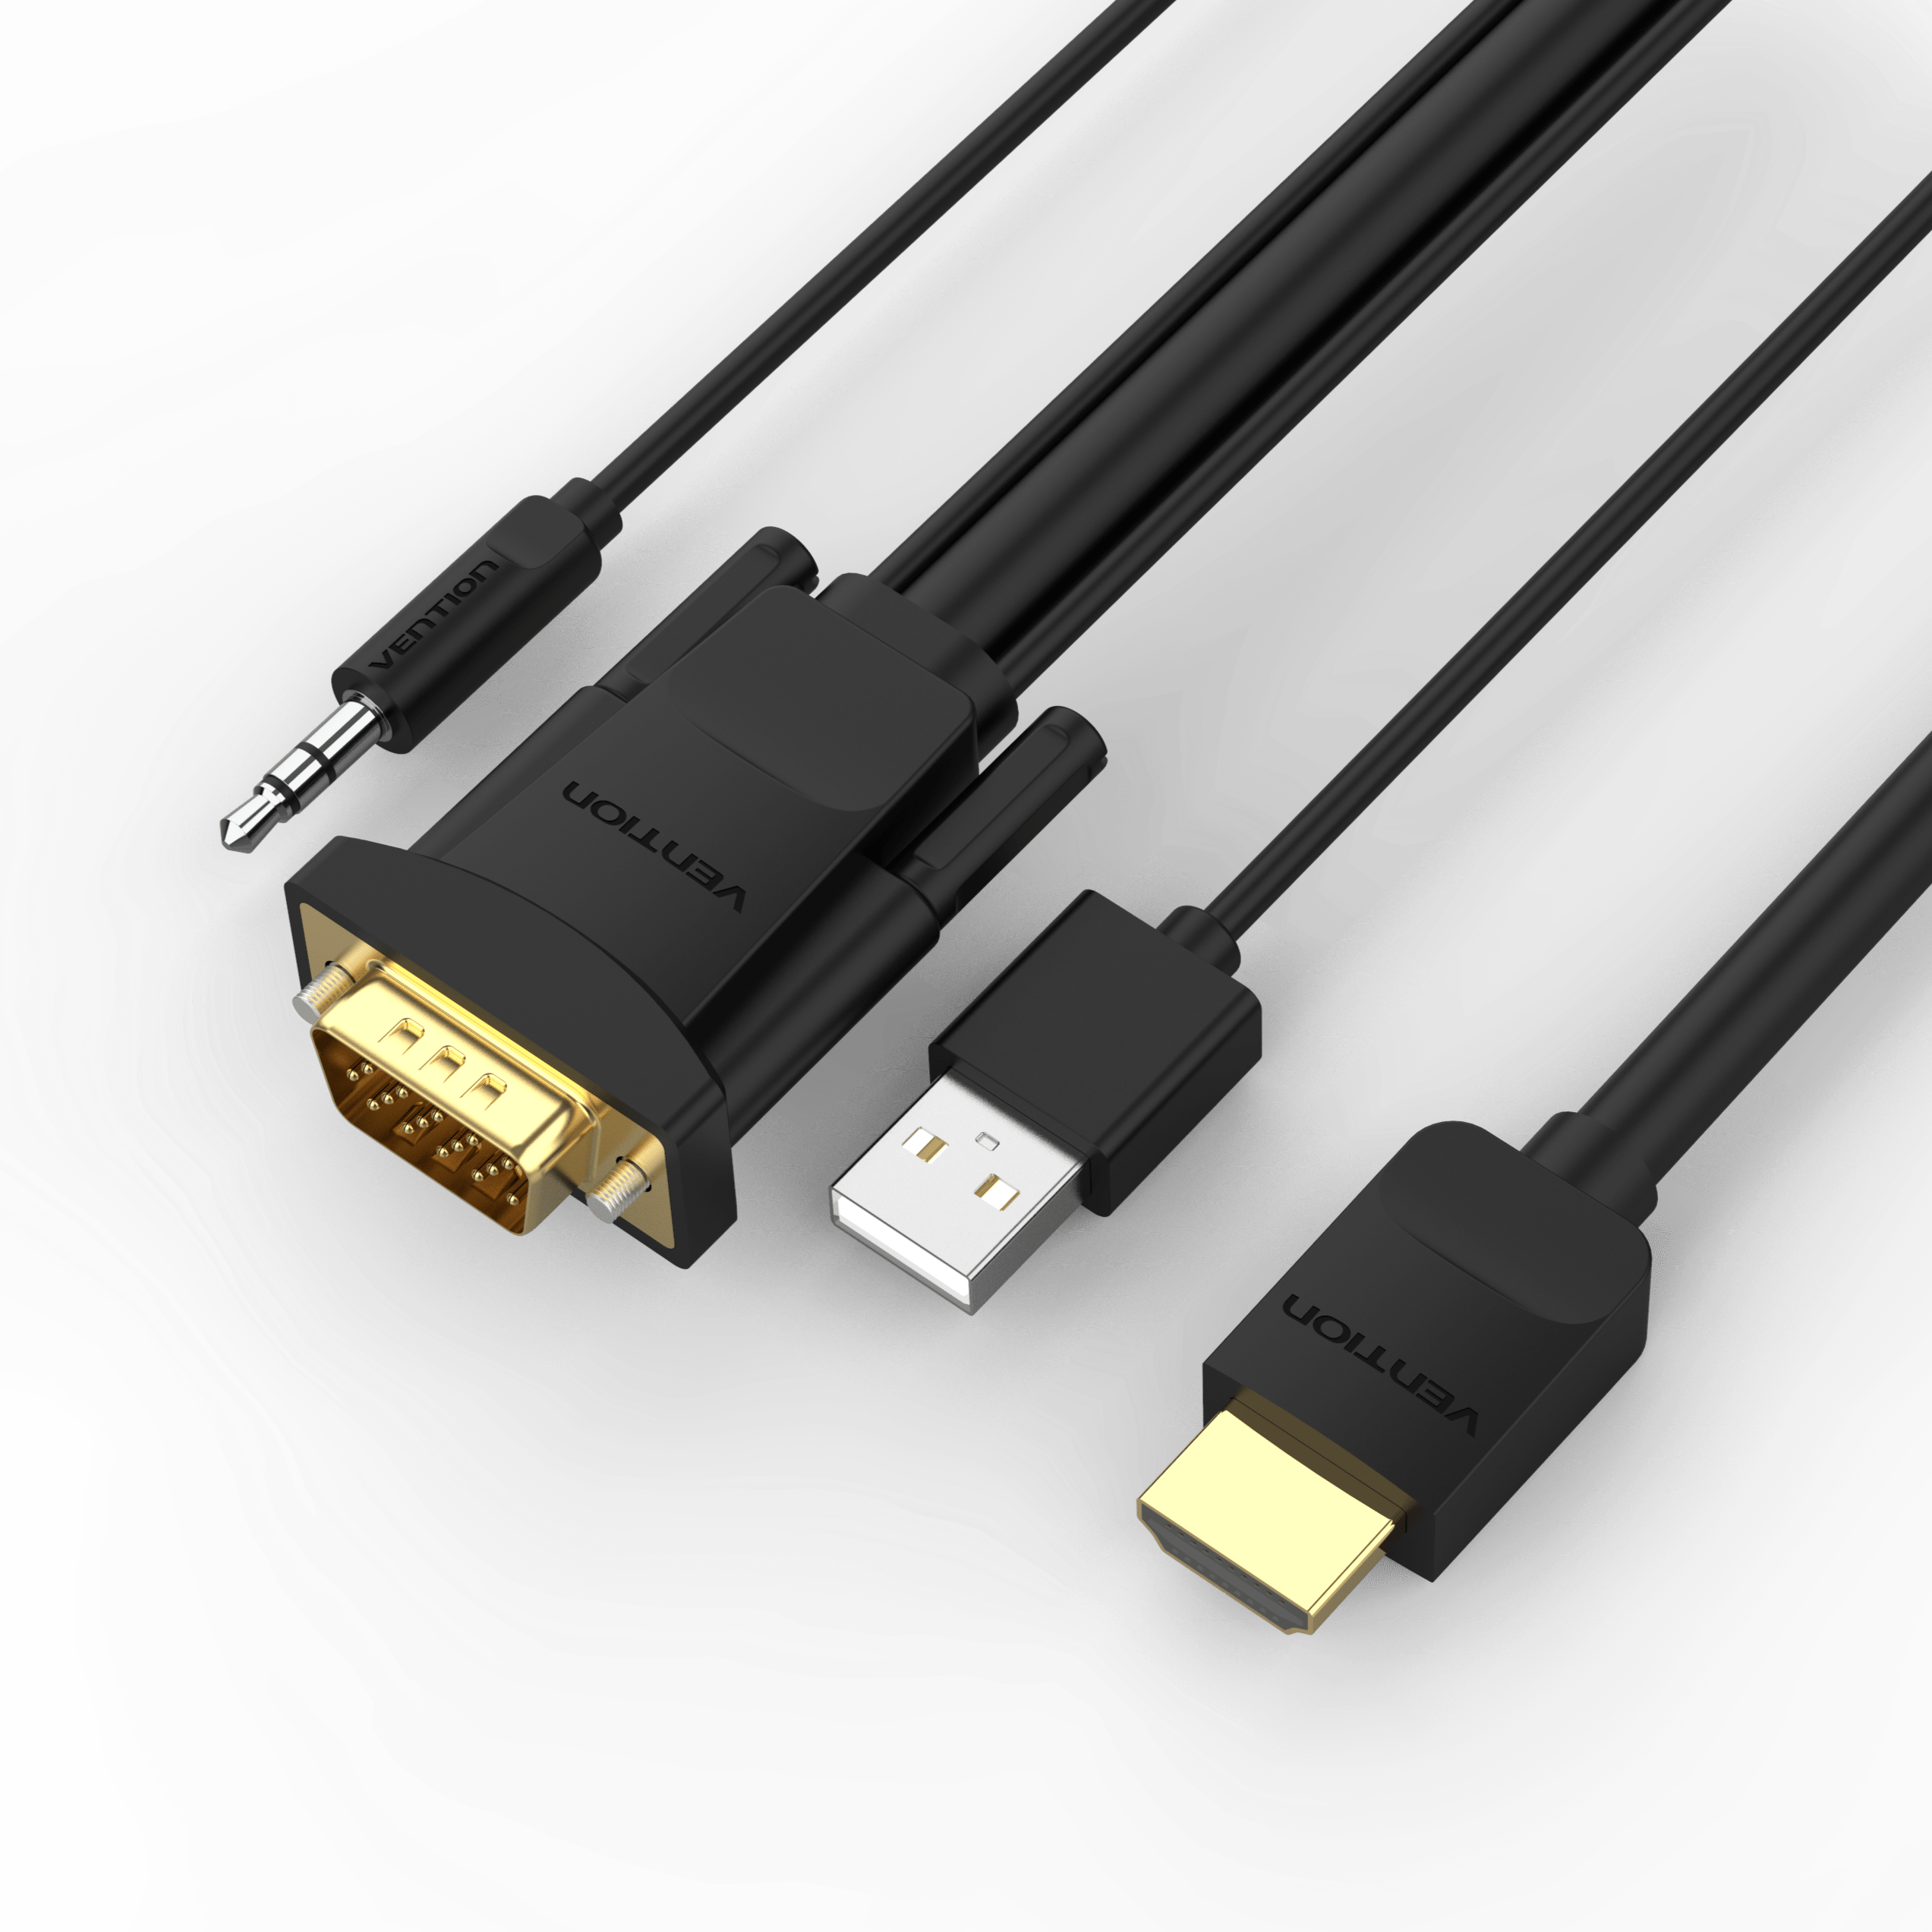 Vention HDMI Cable 4K HDMI to HDMI 2.0 Cable Cord for PS4 Apple TV 4K  Splitter Switch Box Extender 60Hz Video Cabo Cable HDMI 3m